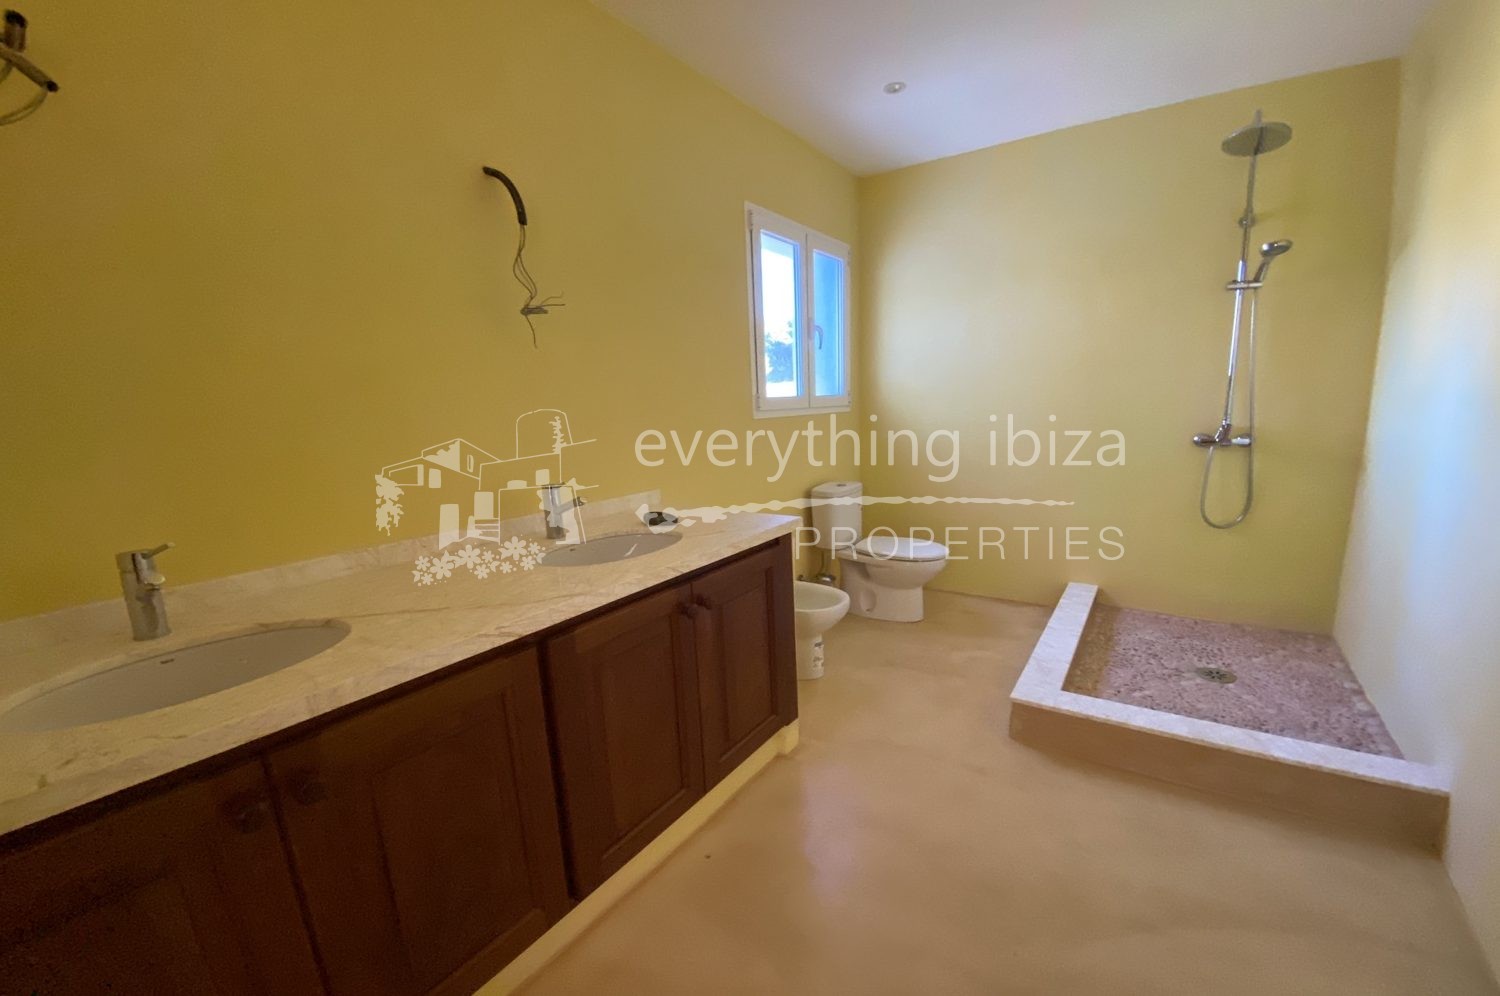 2 Detached Villas with Amazing Views, ref. 1318, for sale in Ibiza by everything ibiza Properties